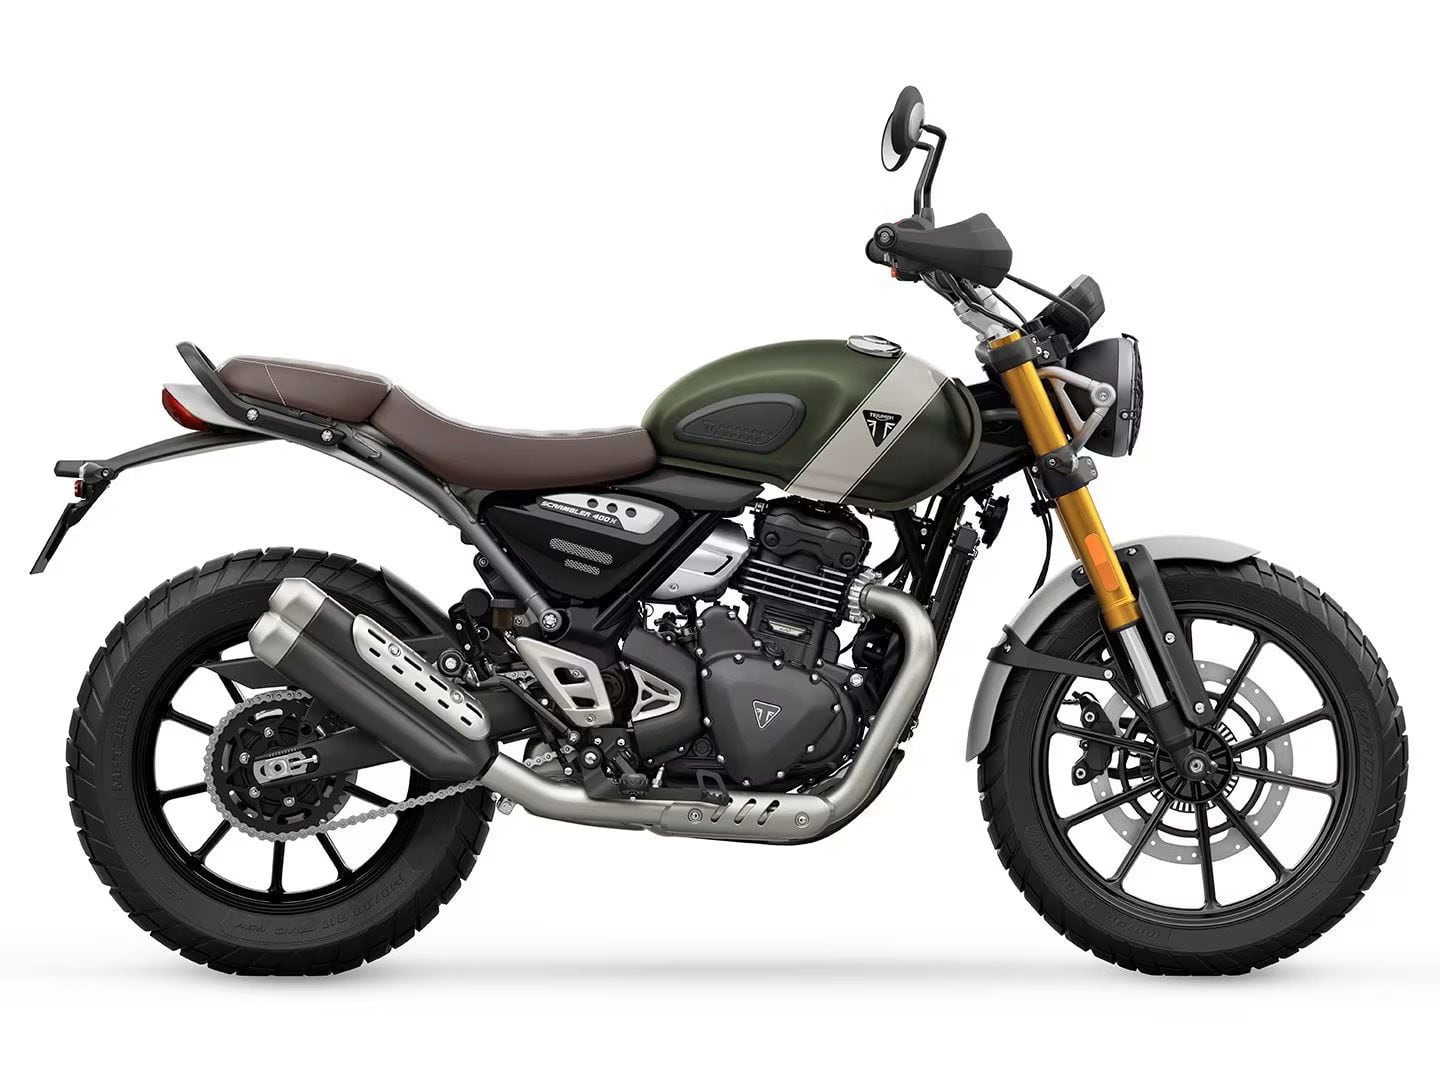 We got a thing for scramblers, and the new Triumph 400 X looks like an awesome interpretation of the off-road capable machines of yore.